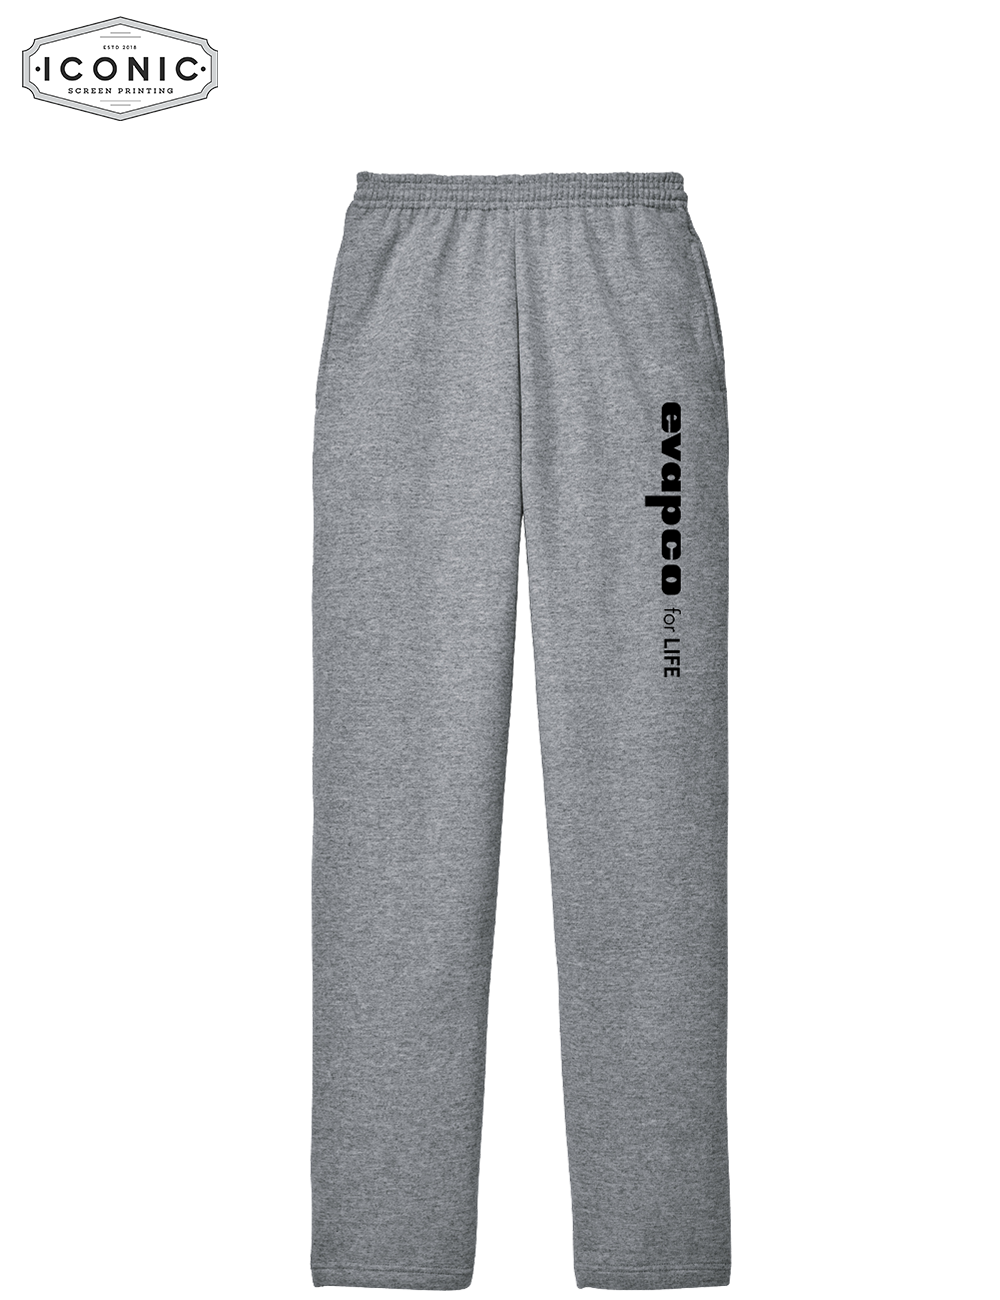 Evapco for Life Words - Core Fleece Sweatpant with Pockets - Print